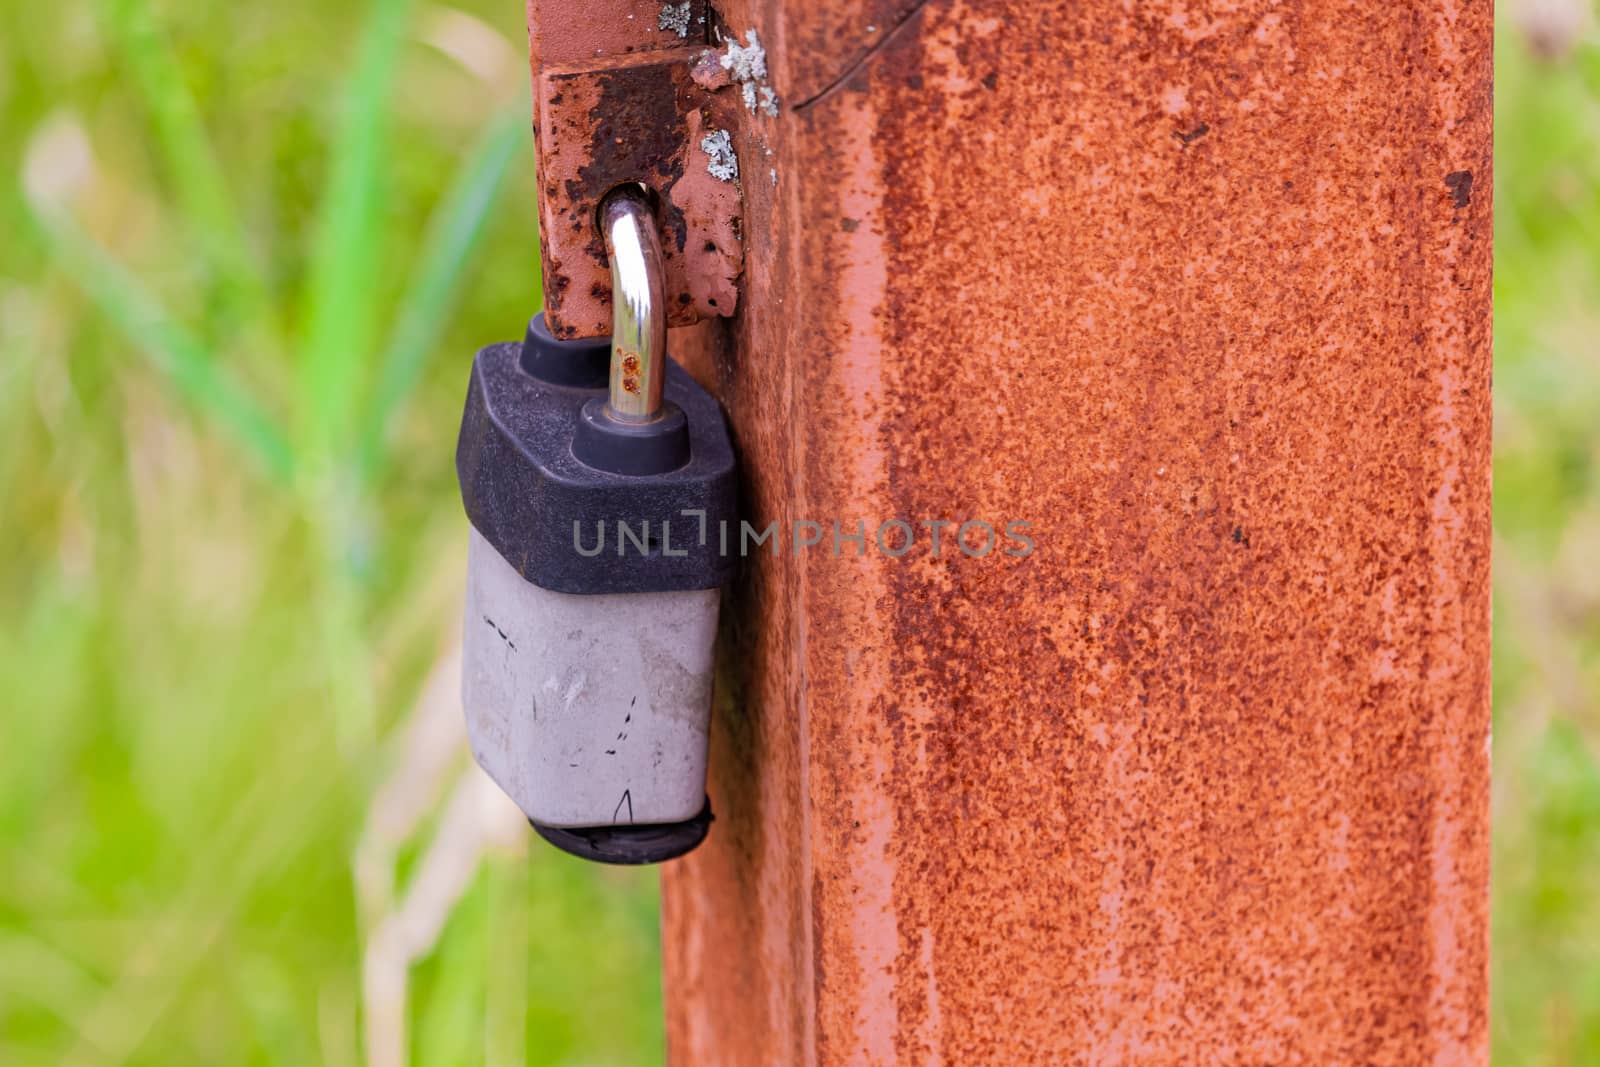 A rusty post along a footpath has a padlock on it, restricting access to an electrical line inside.